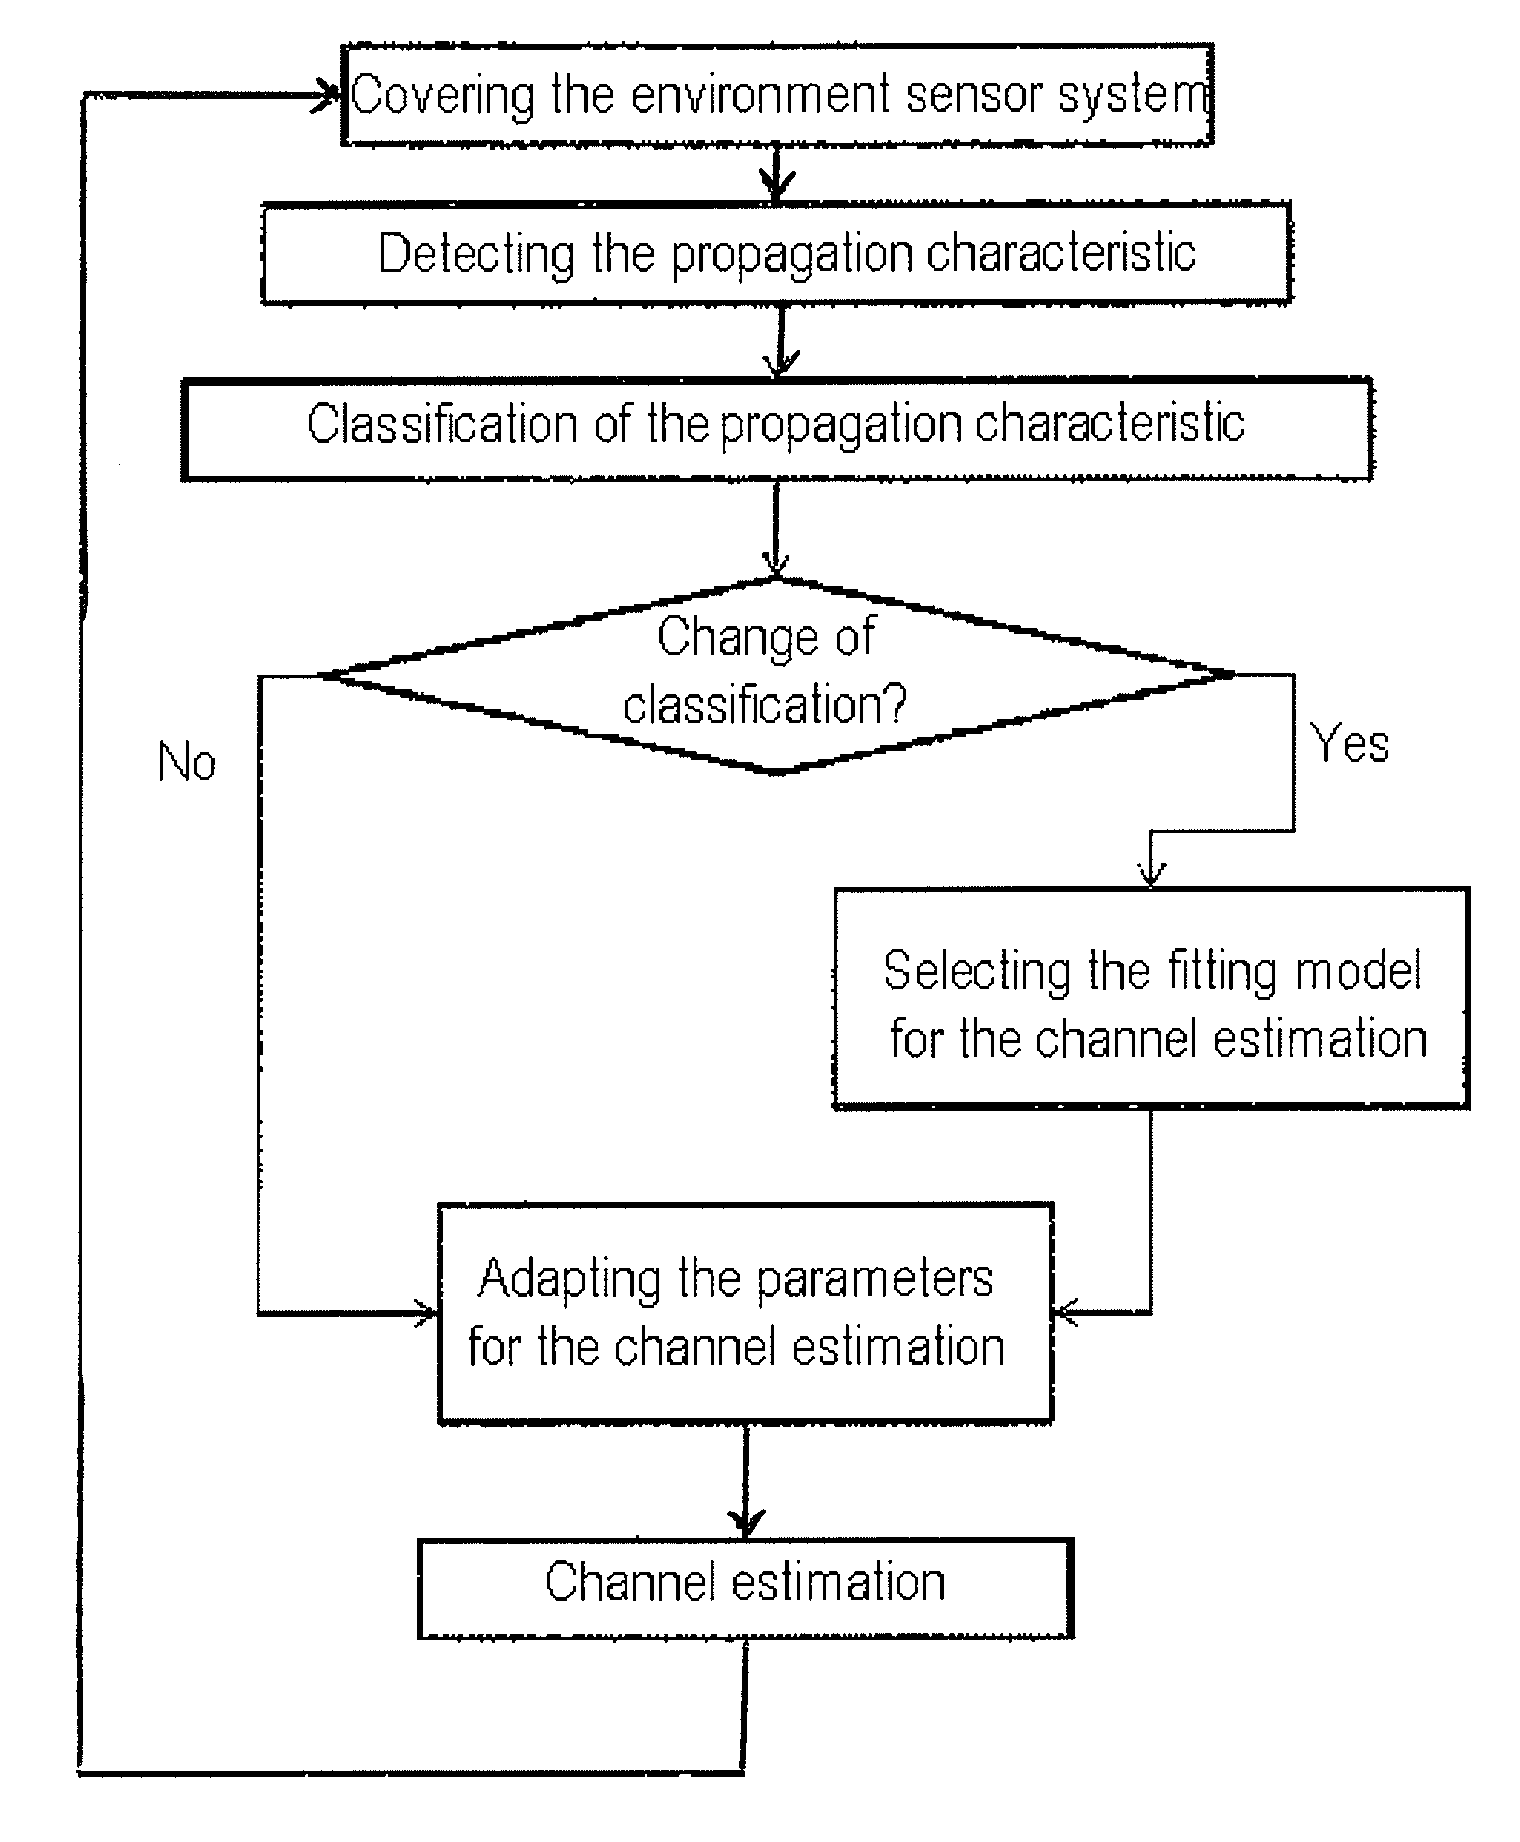 Method for adaptive channel estimation for wireless communication between a vehicle and other communication subscribers using the measurement results of the environment sensor system